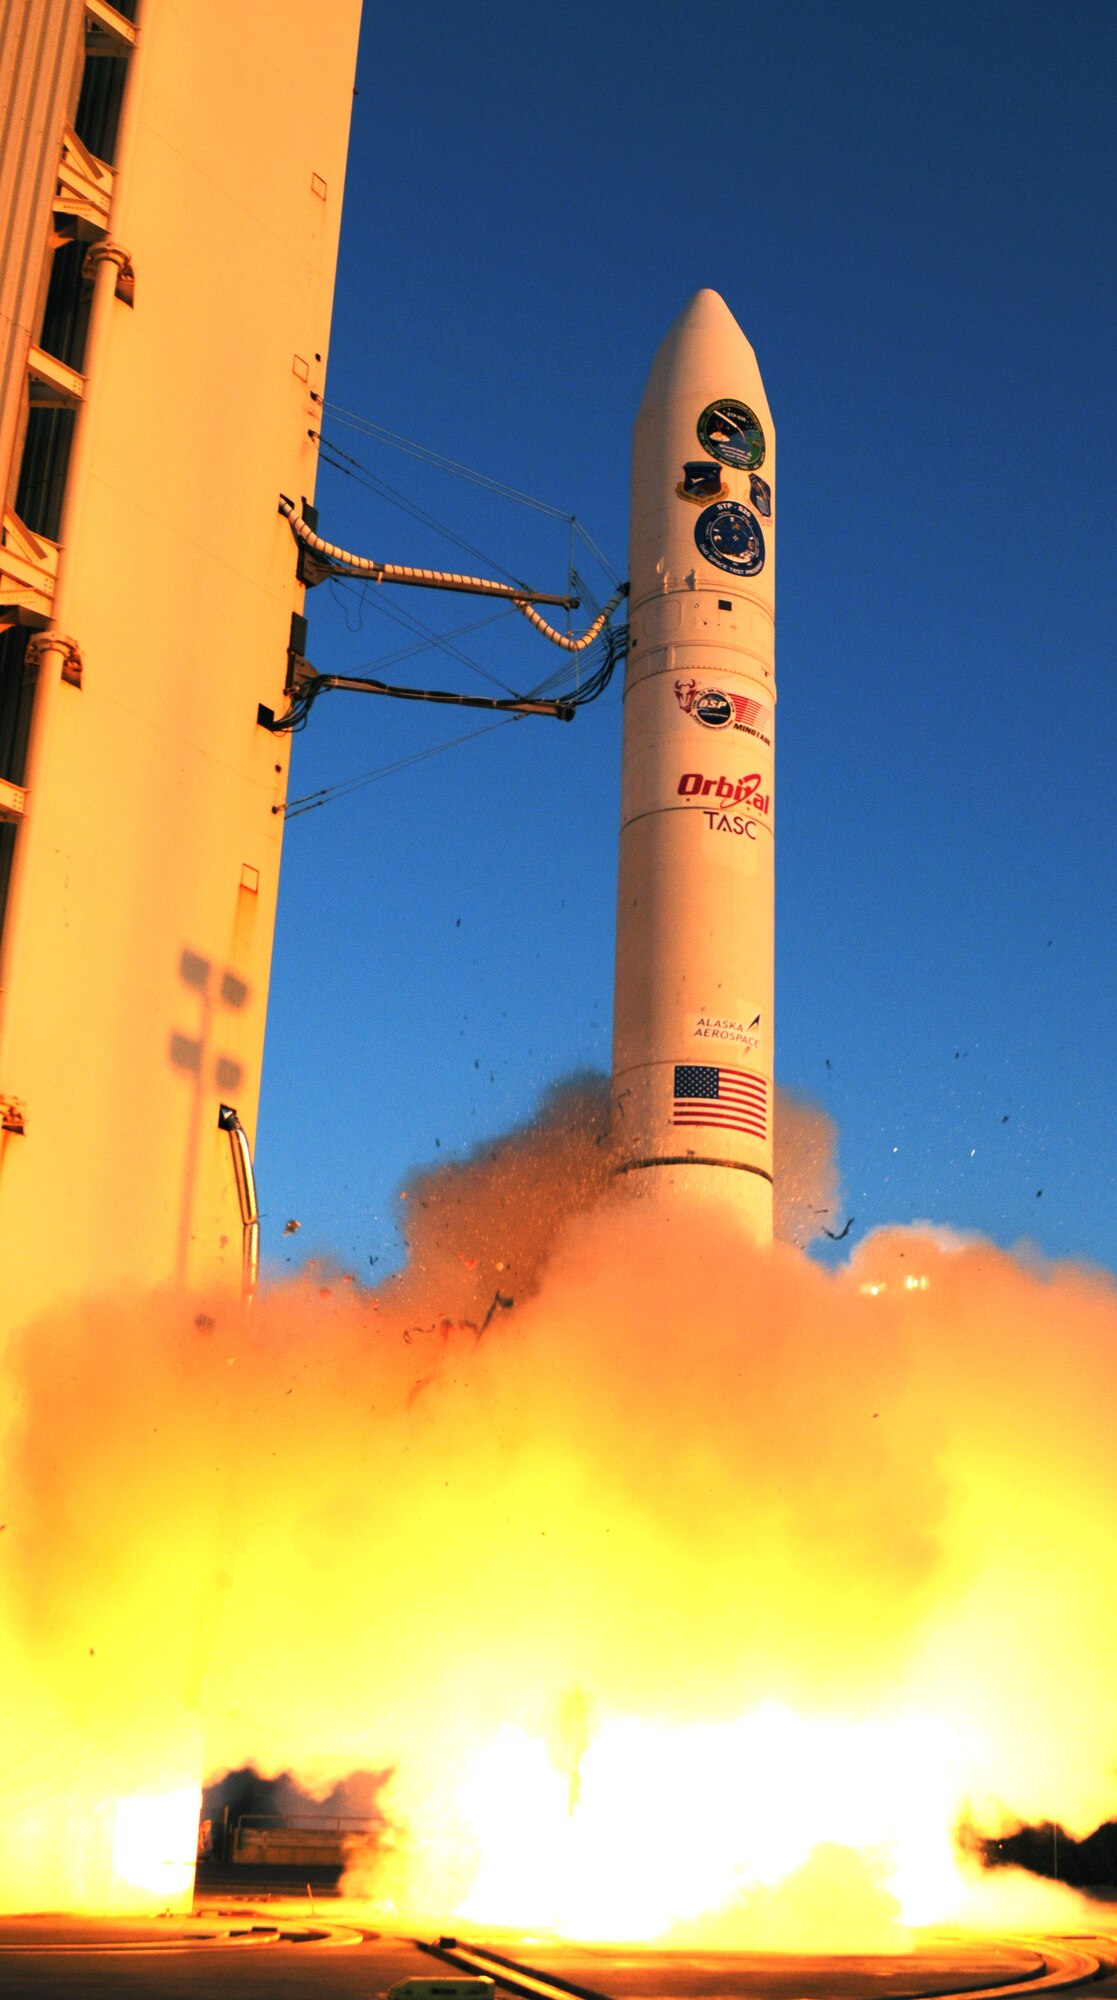 A rocket carrying FalconSAT-5 lifts off from Kodiak Launch Complex, Alaska, Nov. 19, 2010. FalconSAT-5 is an Air Force Academy satellite designed, built and tested by seniors in a capstone astronauticcs project. (U.S. Air Force photo)